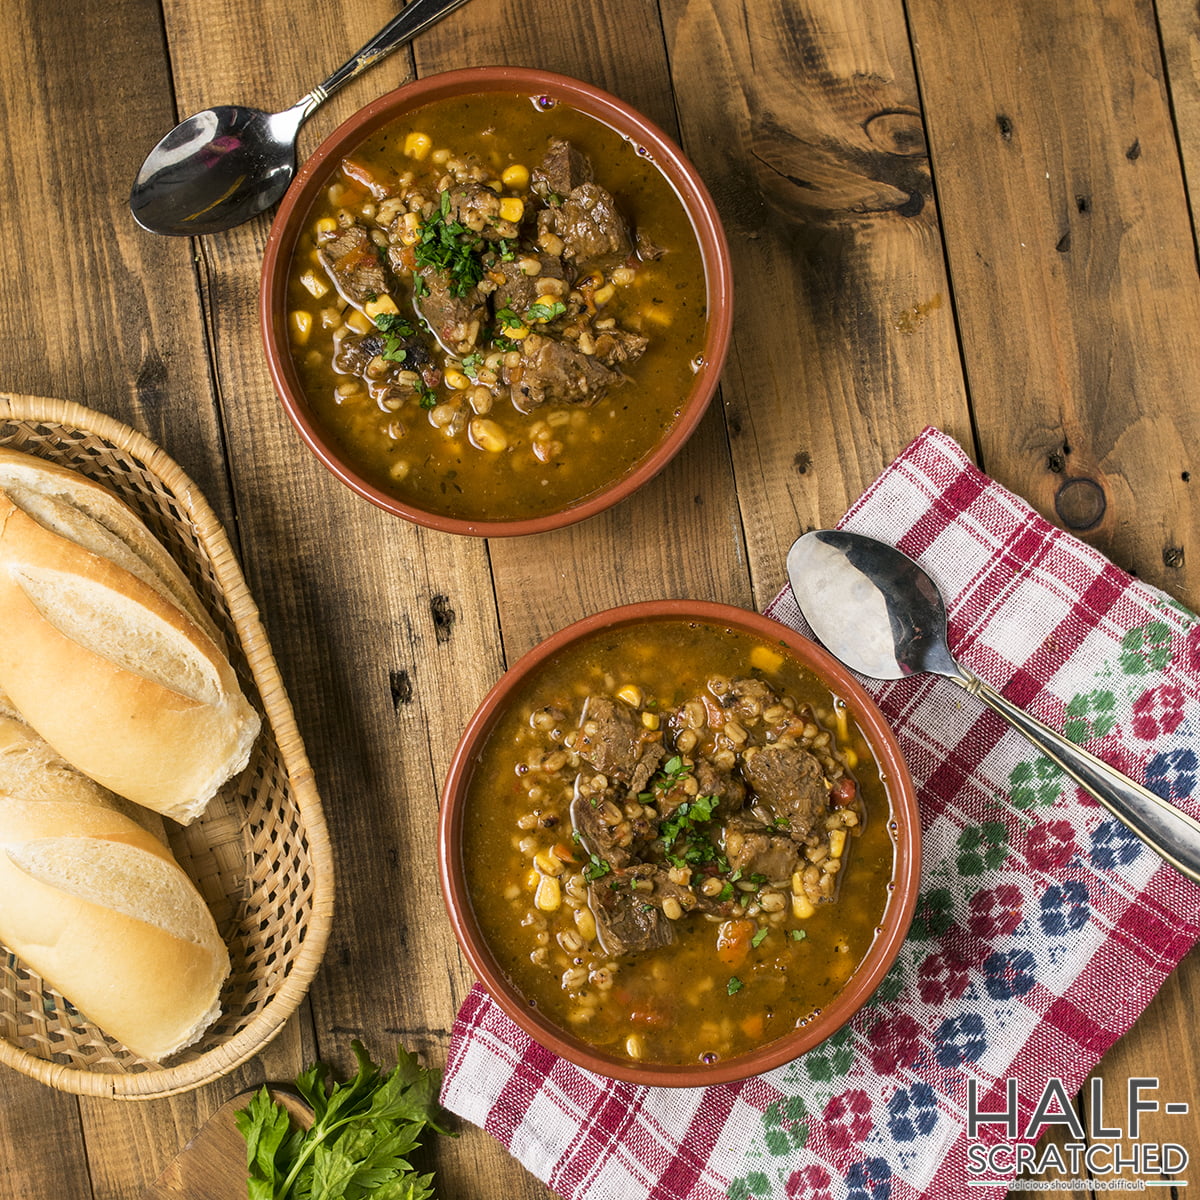 Two bowls of beef and barley soup served with bread